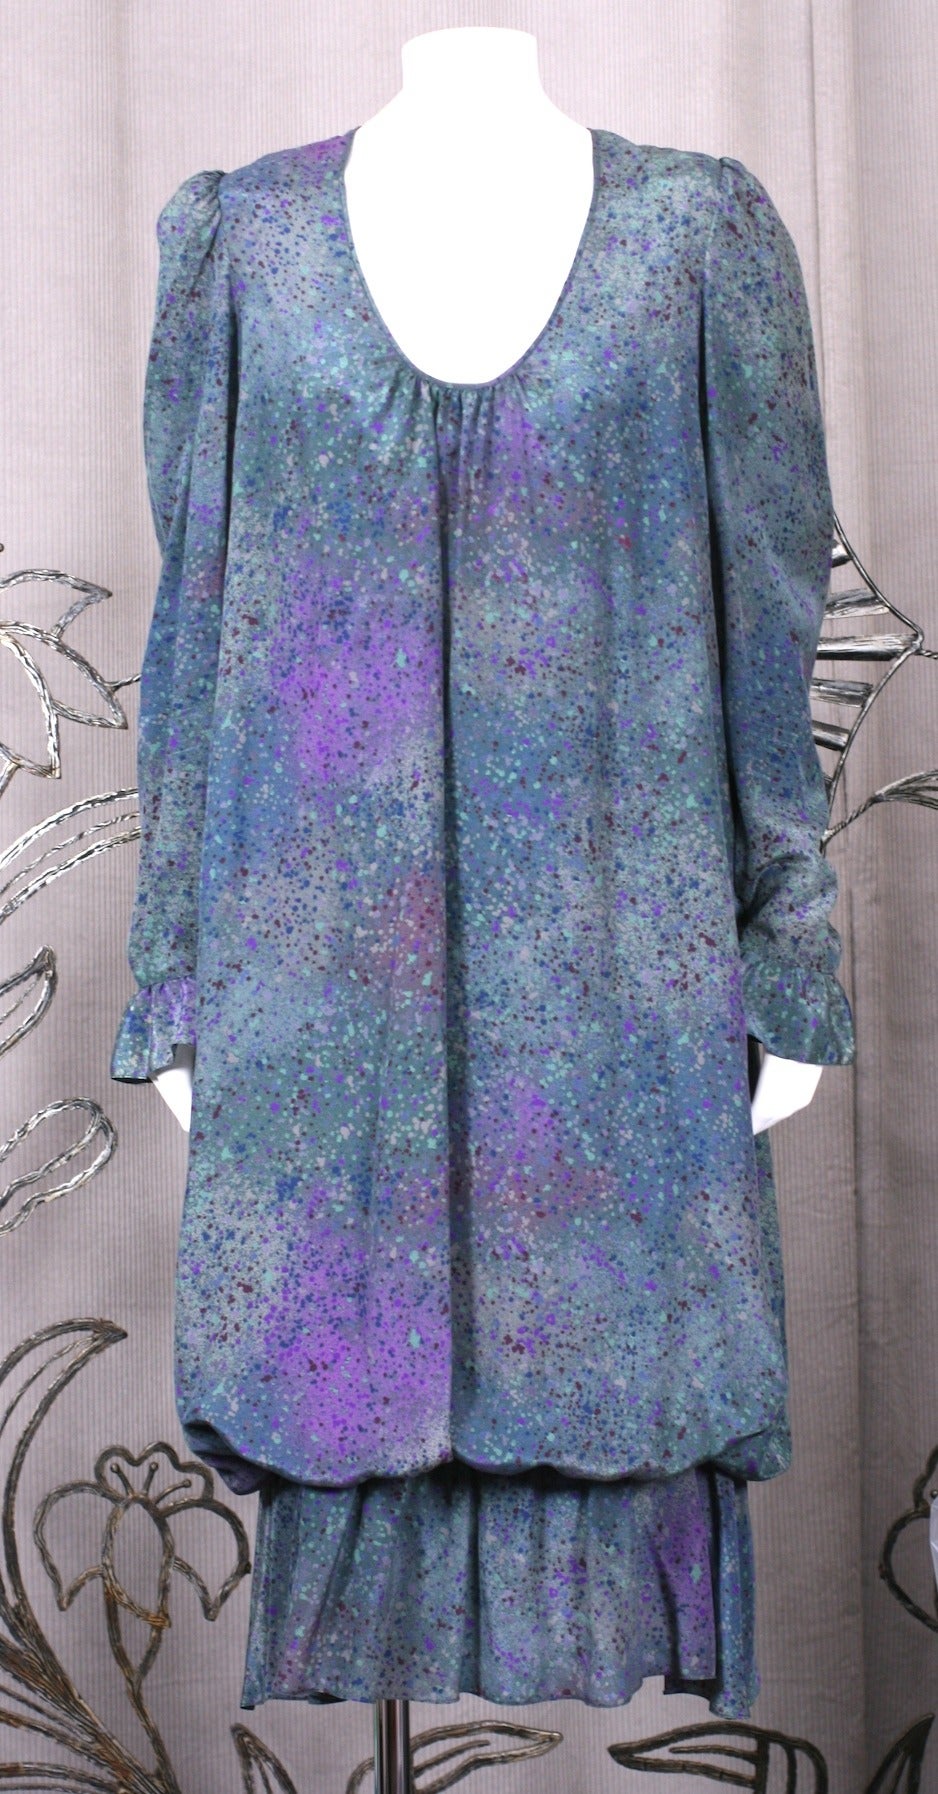 Helga Howie Impressionist Print Silk Print Bubble Dress from the 1980's. Mottled print in teals, greens and purples on silk crepe. 
An interior slip holds the 